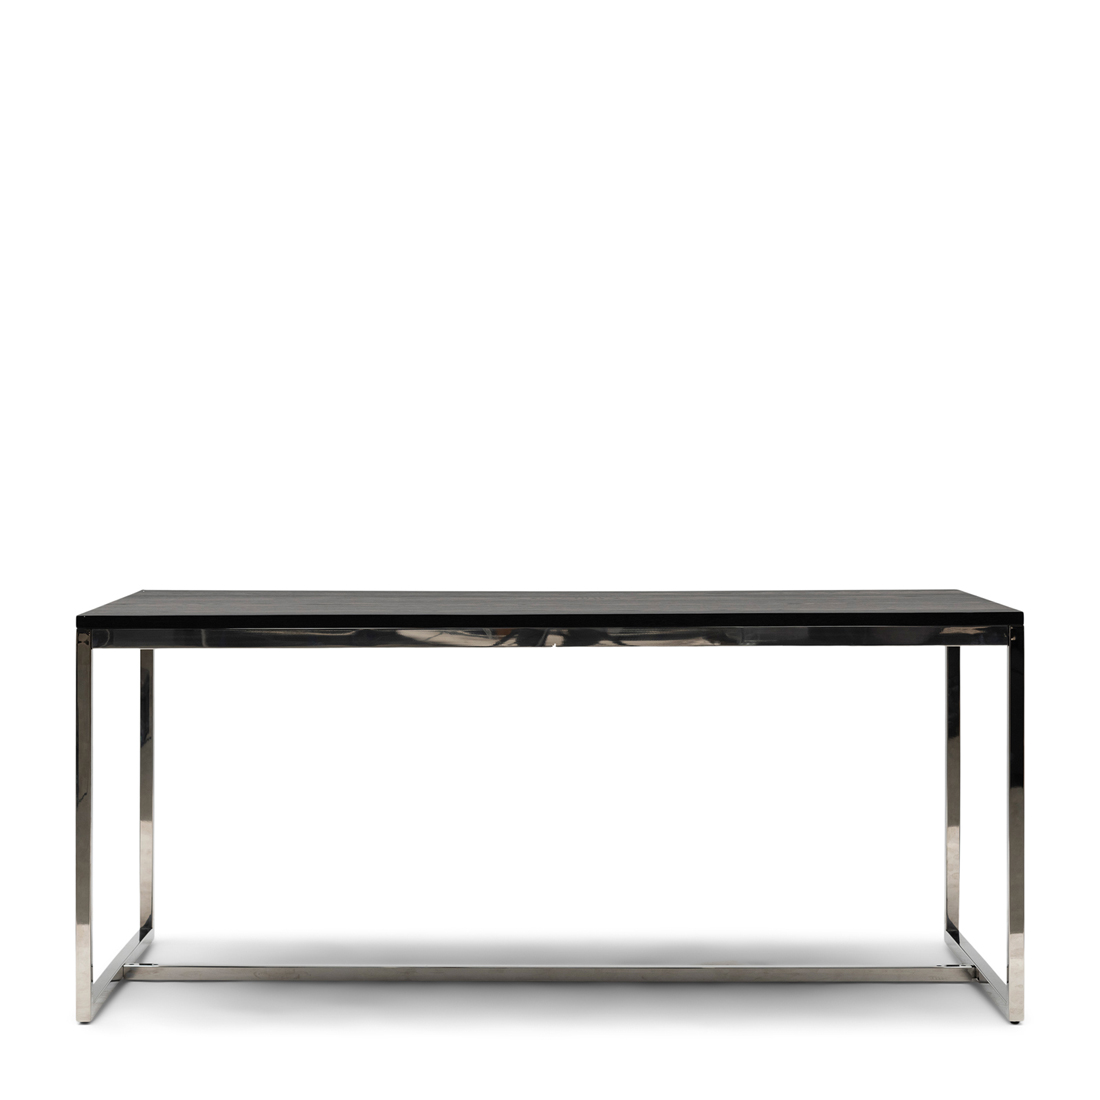 Nomad Dining Table 180x90, black